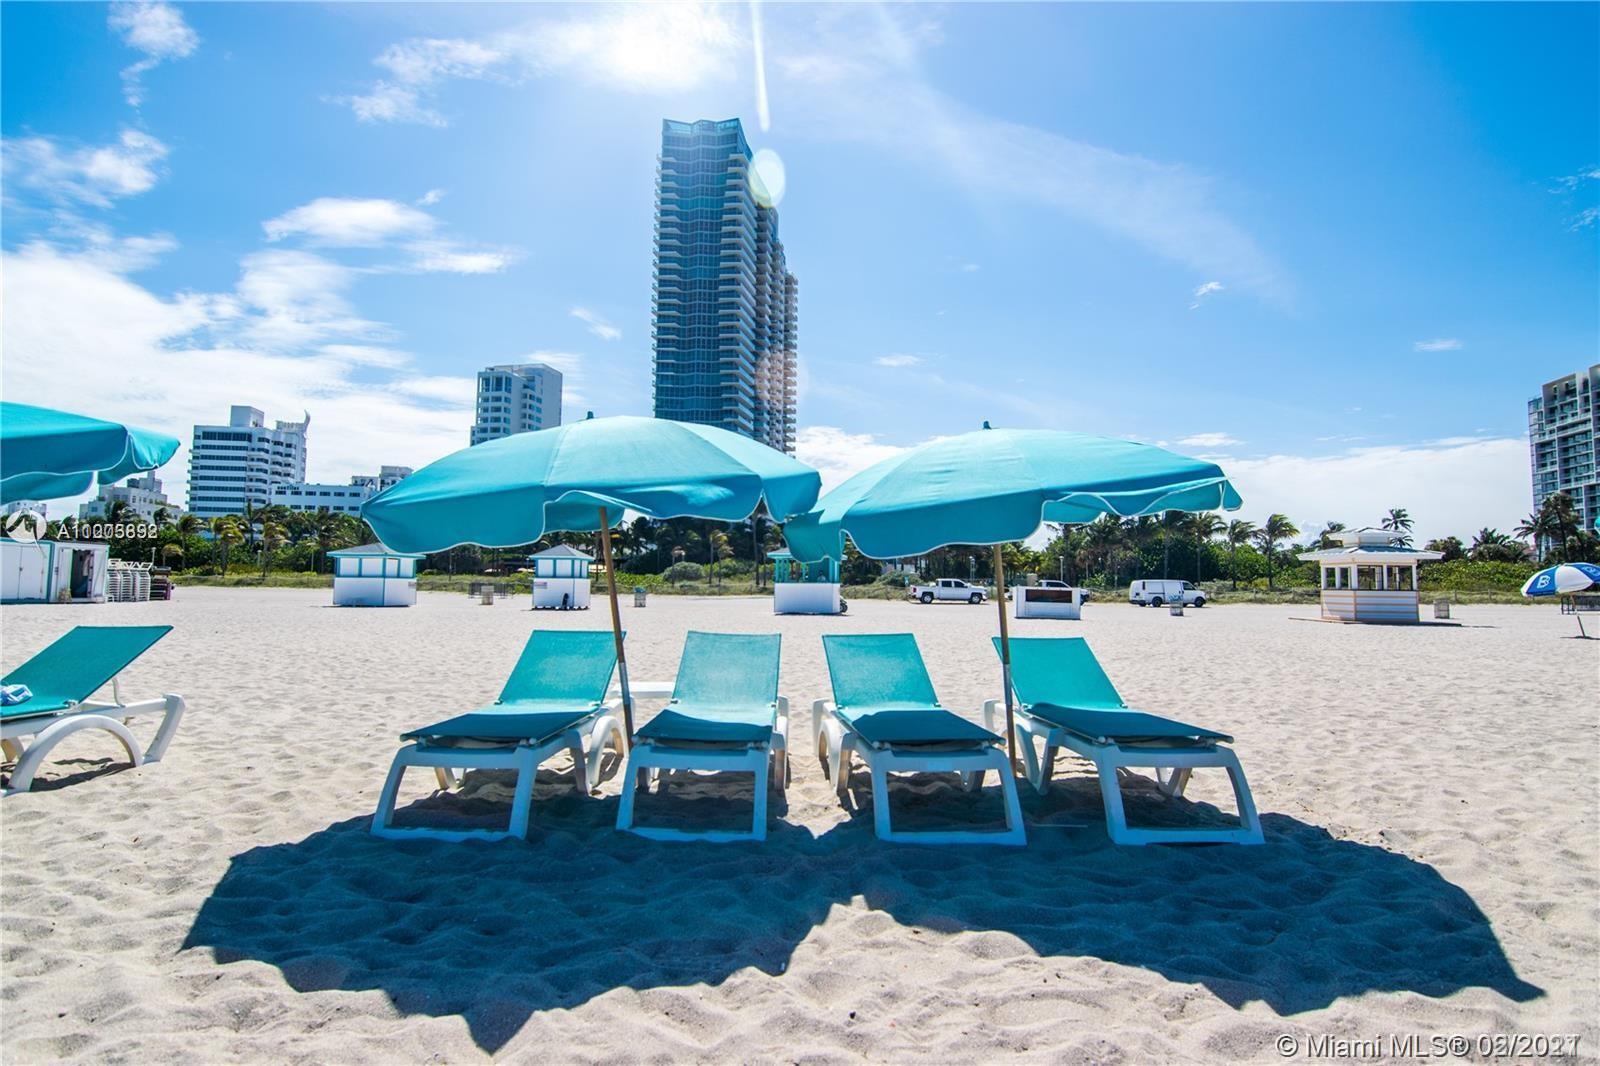 Complimentary beach chair + umbrella service for Artecity residents just 2 blocks away at 12th street!